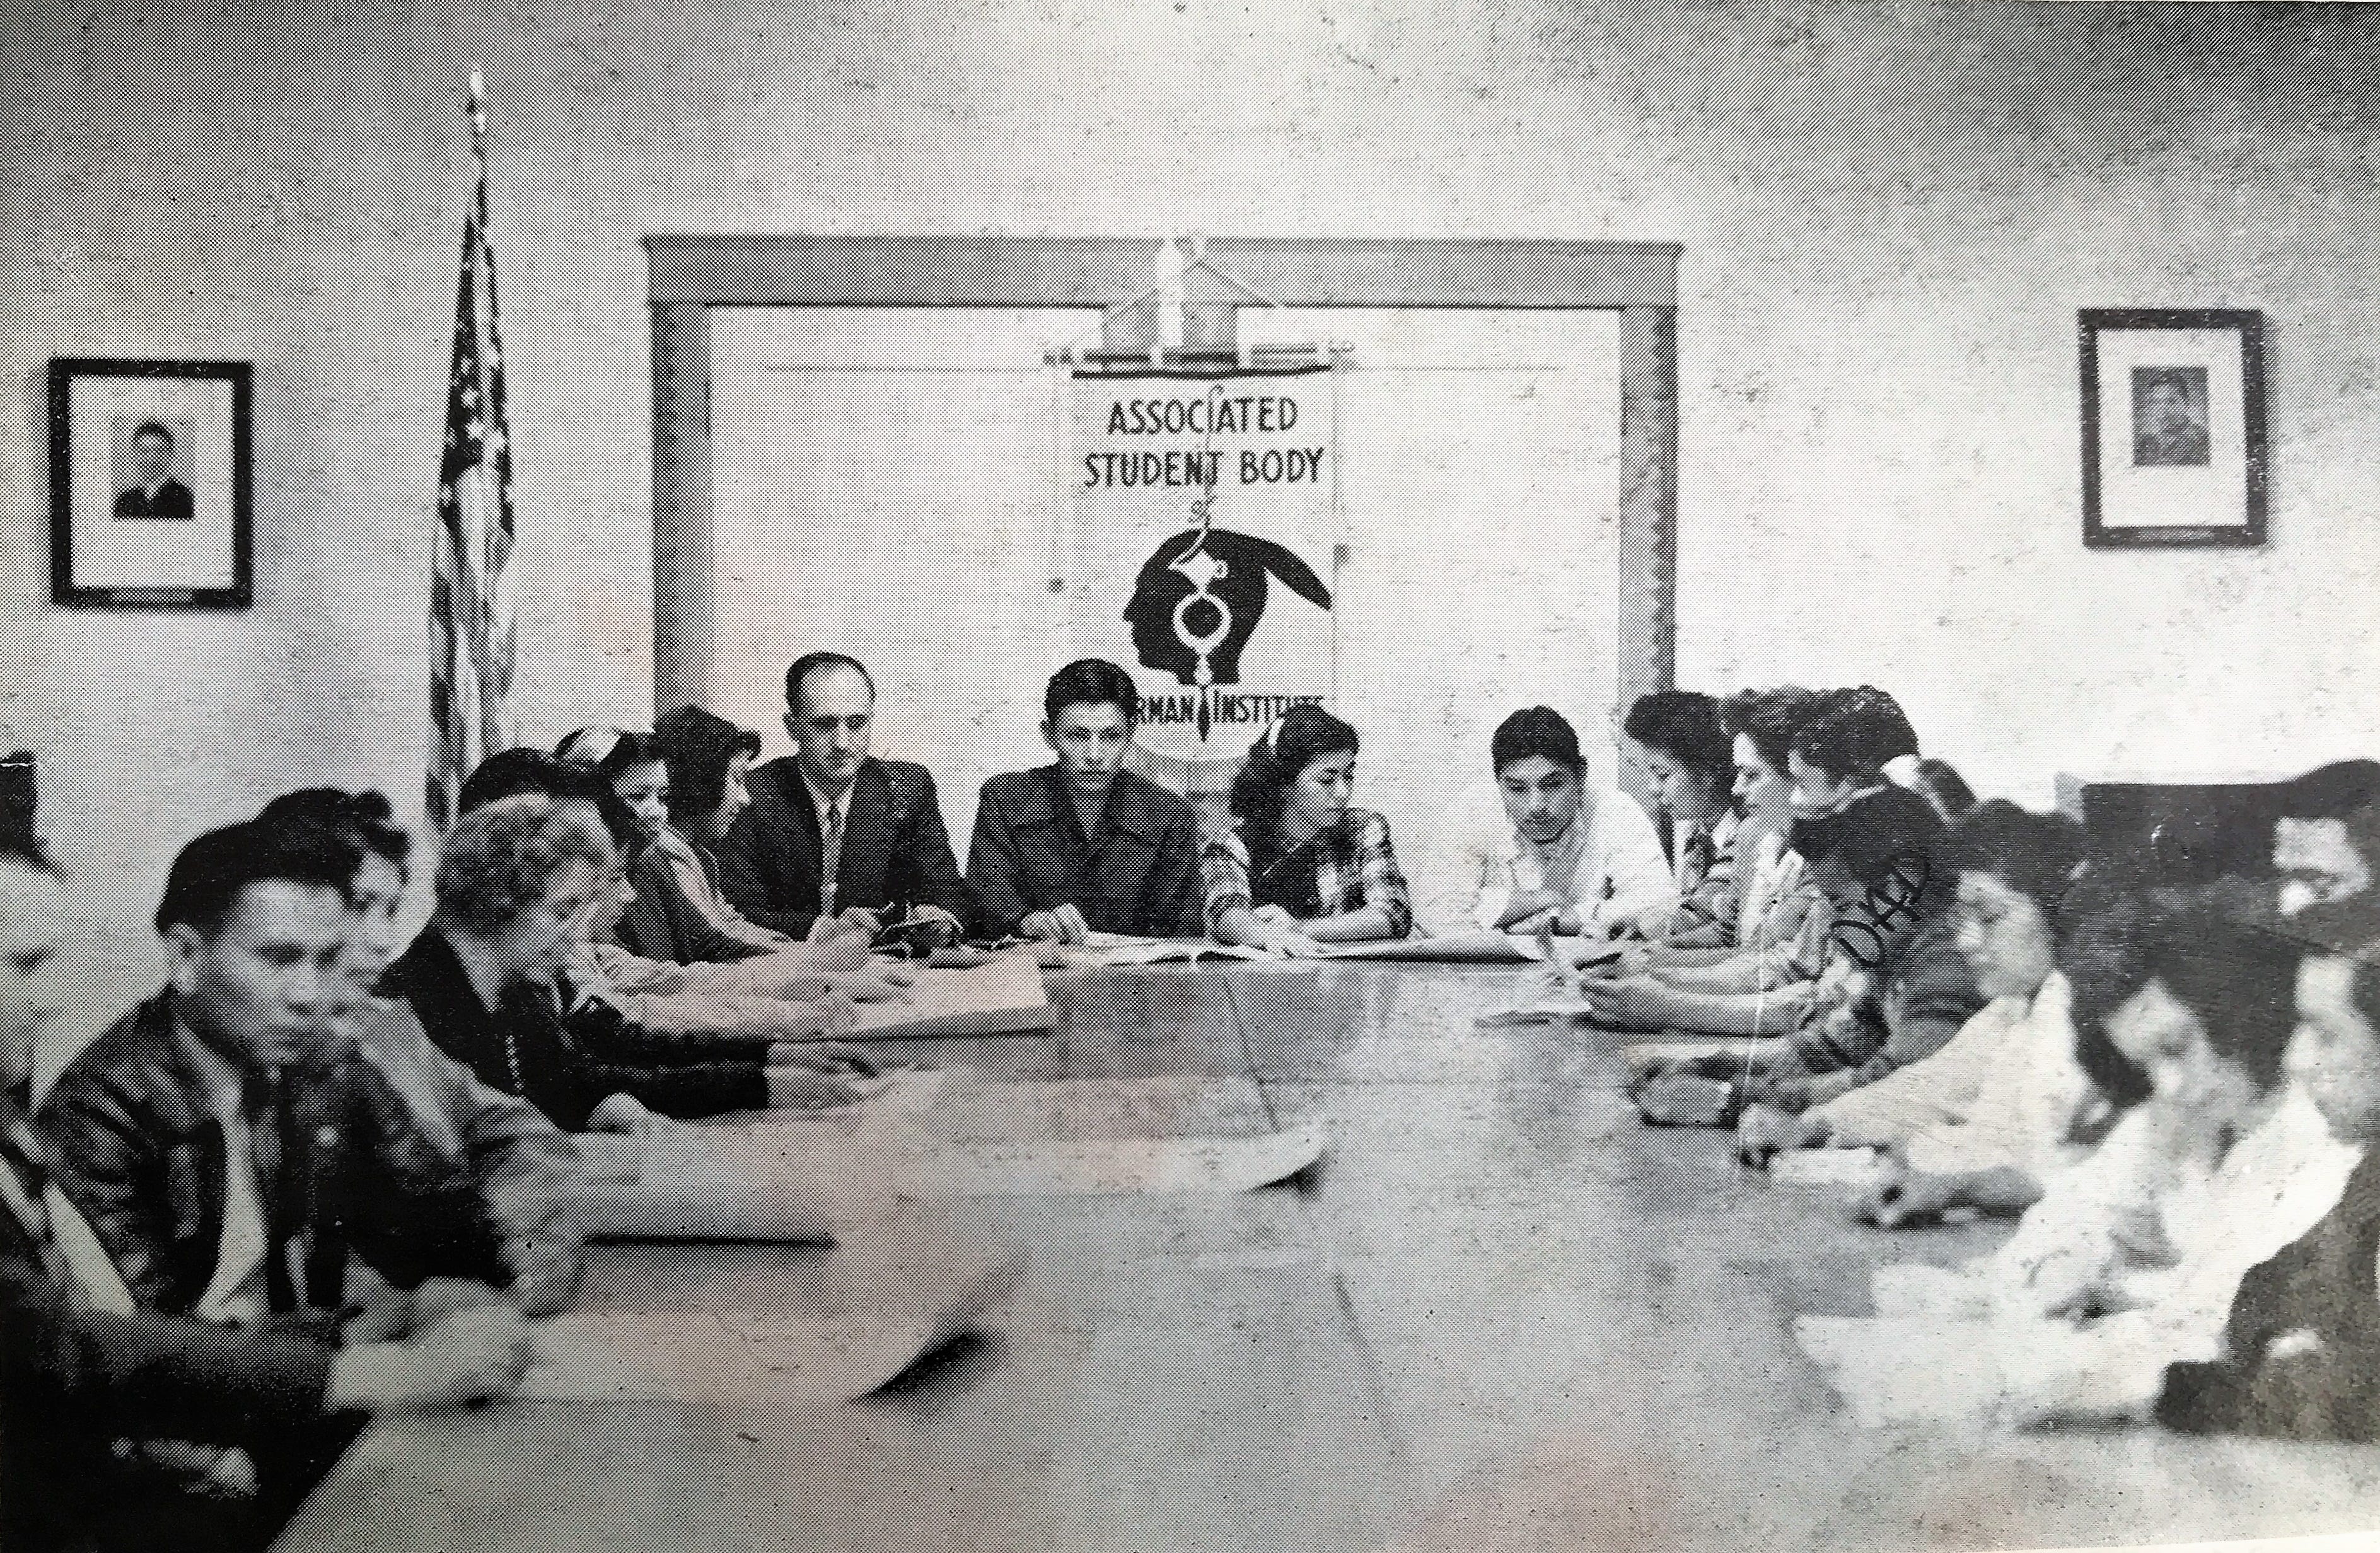 The 1948 yearbook for Sherman Indian High School shows April Carmelo's father, Daniel Carmelo (Dad written over face), in a photo titled "Associated Student Body Cabinet in Session."